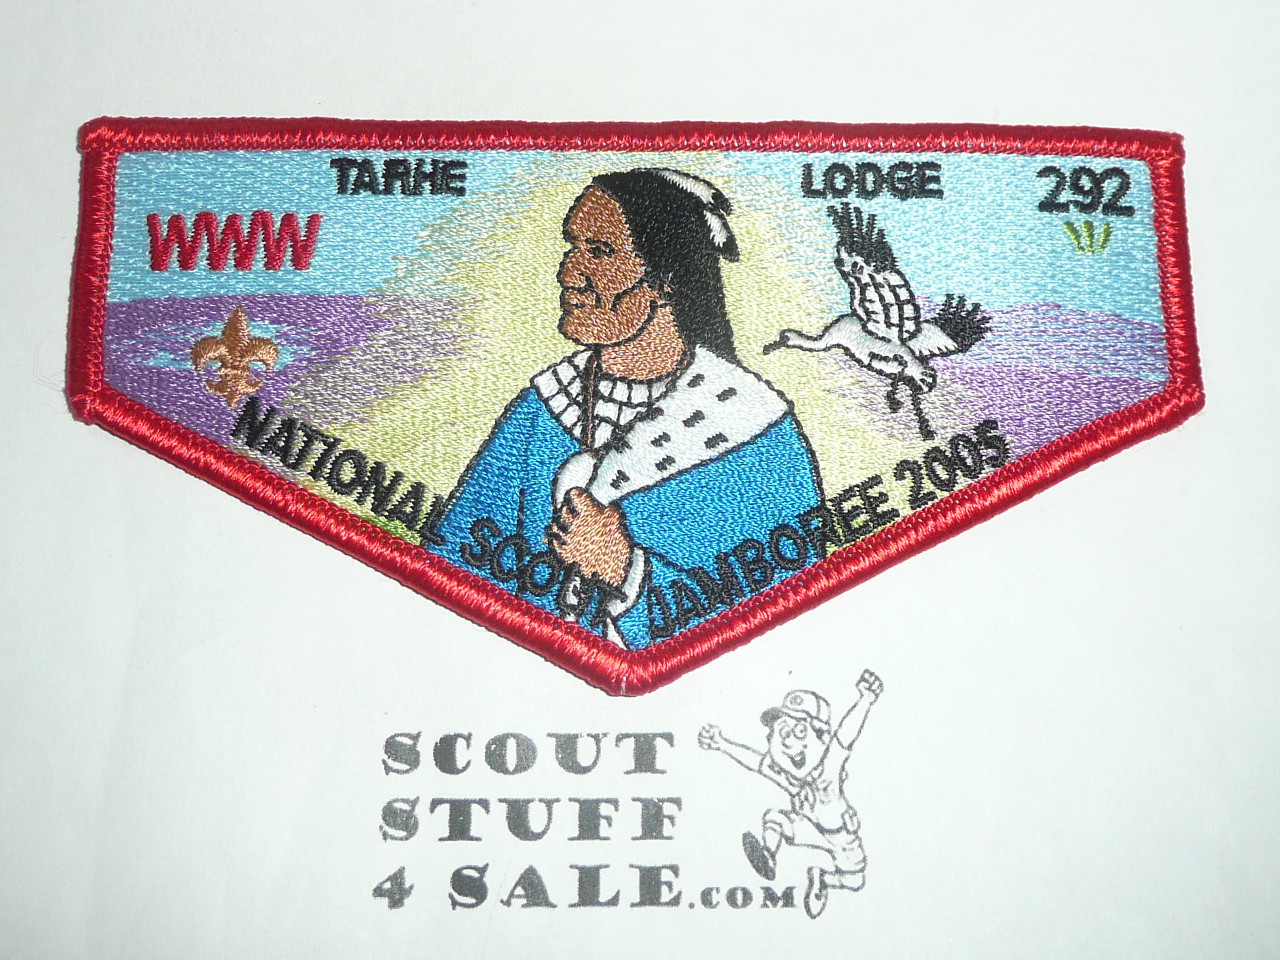 Order of the Arrow Lodge #292 Tarhe s42 2005 Jamboree Flap Patch - Boy Scout